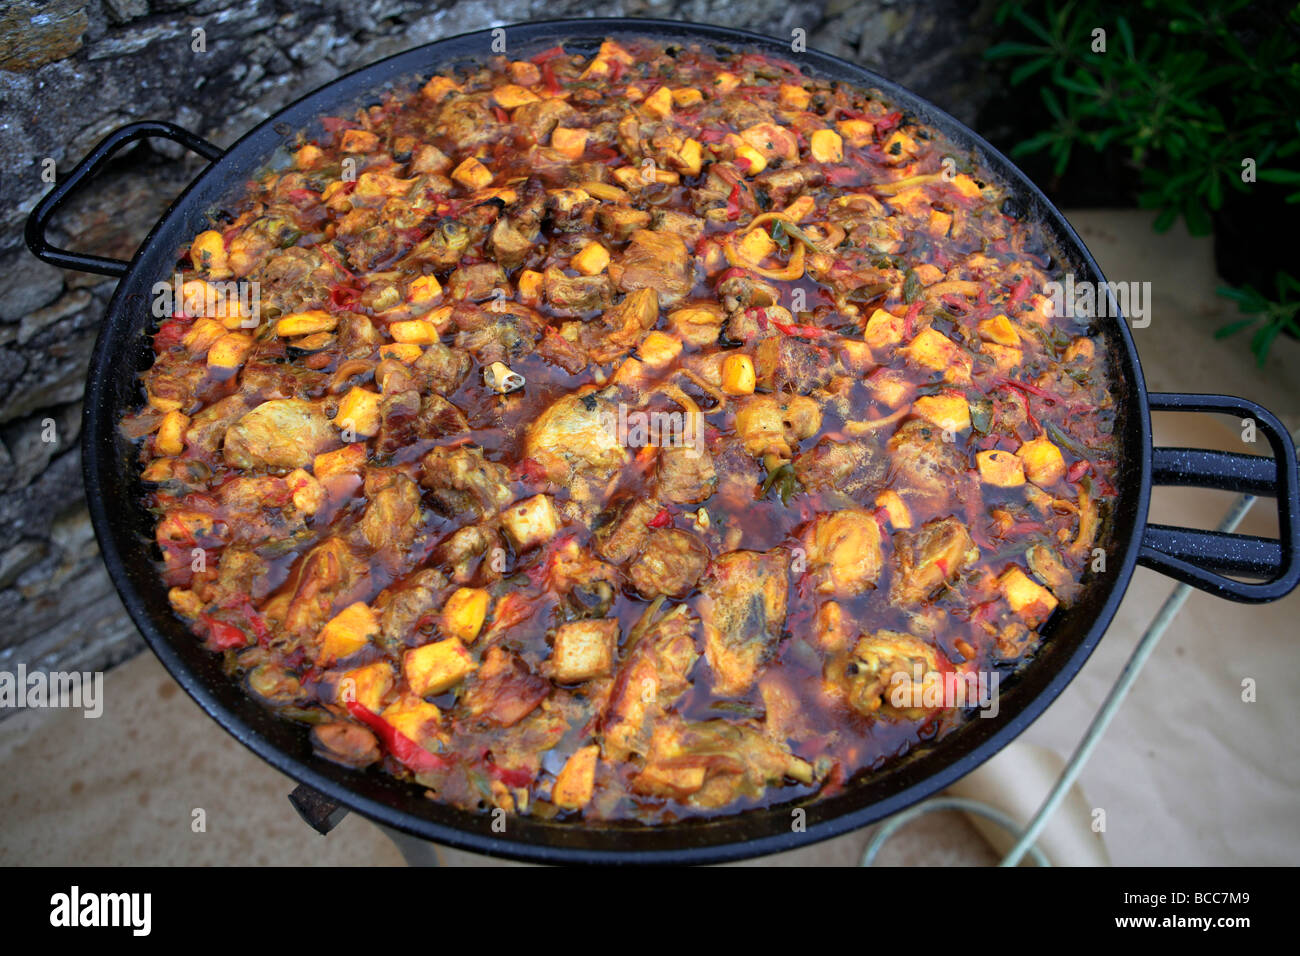 Cooking Paella Spanish Paella probably Spains most colourful and famous gastronomic delight. Spanish food. Stock Photo